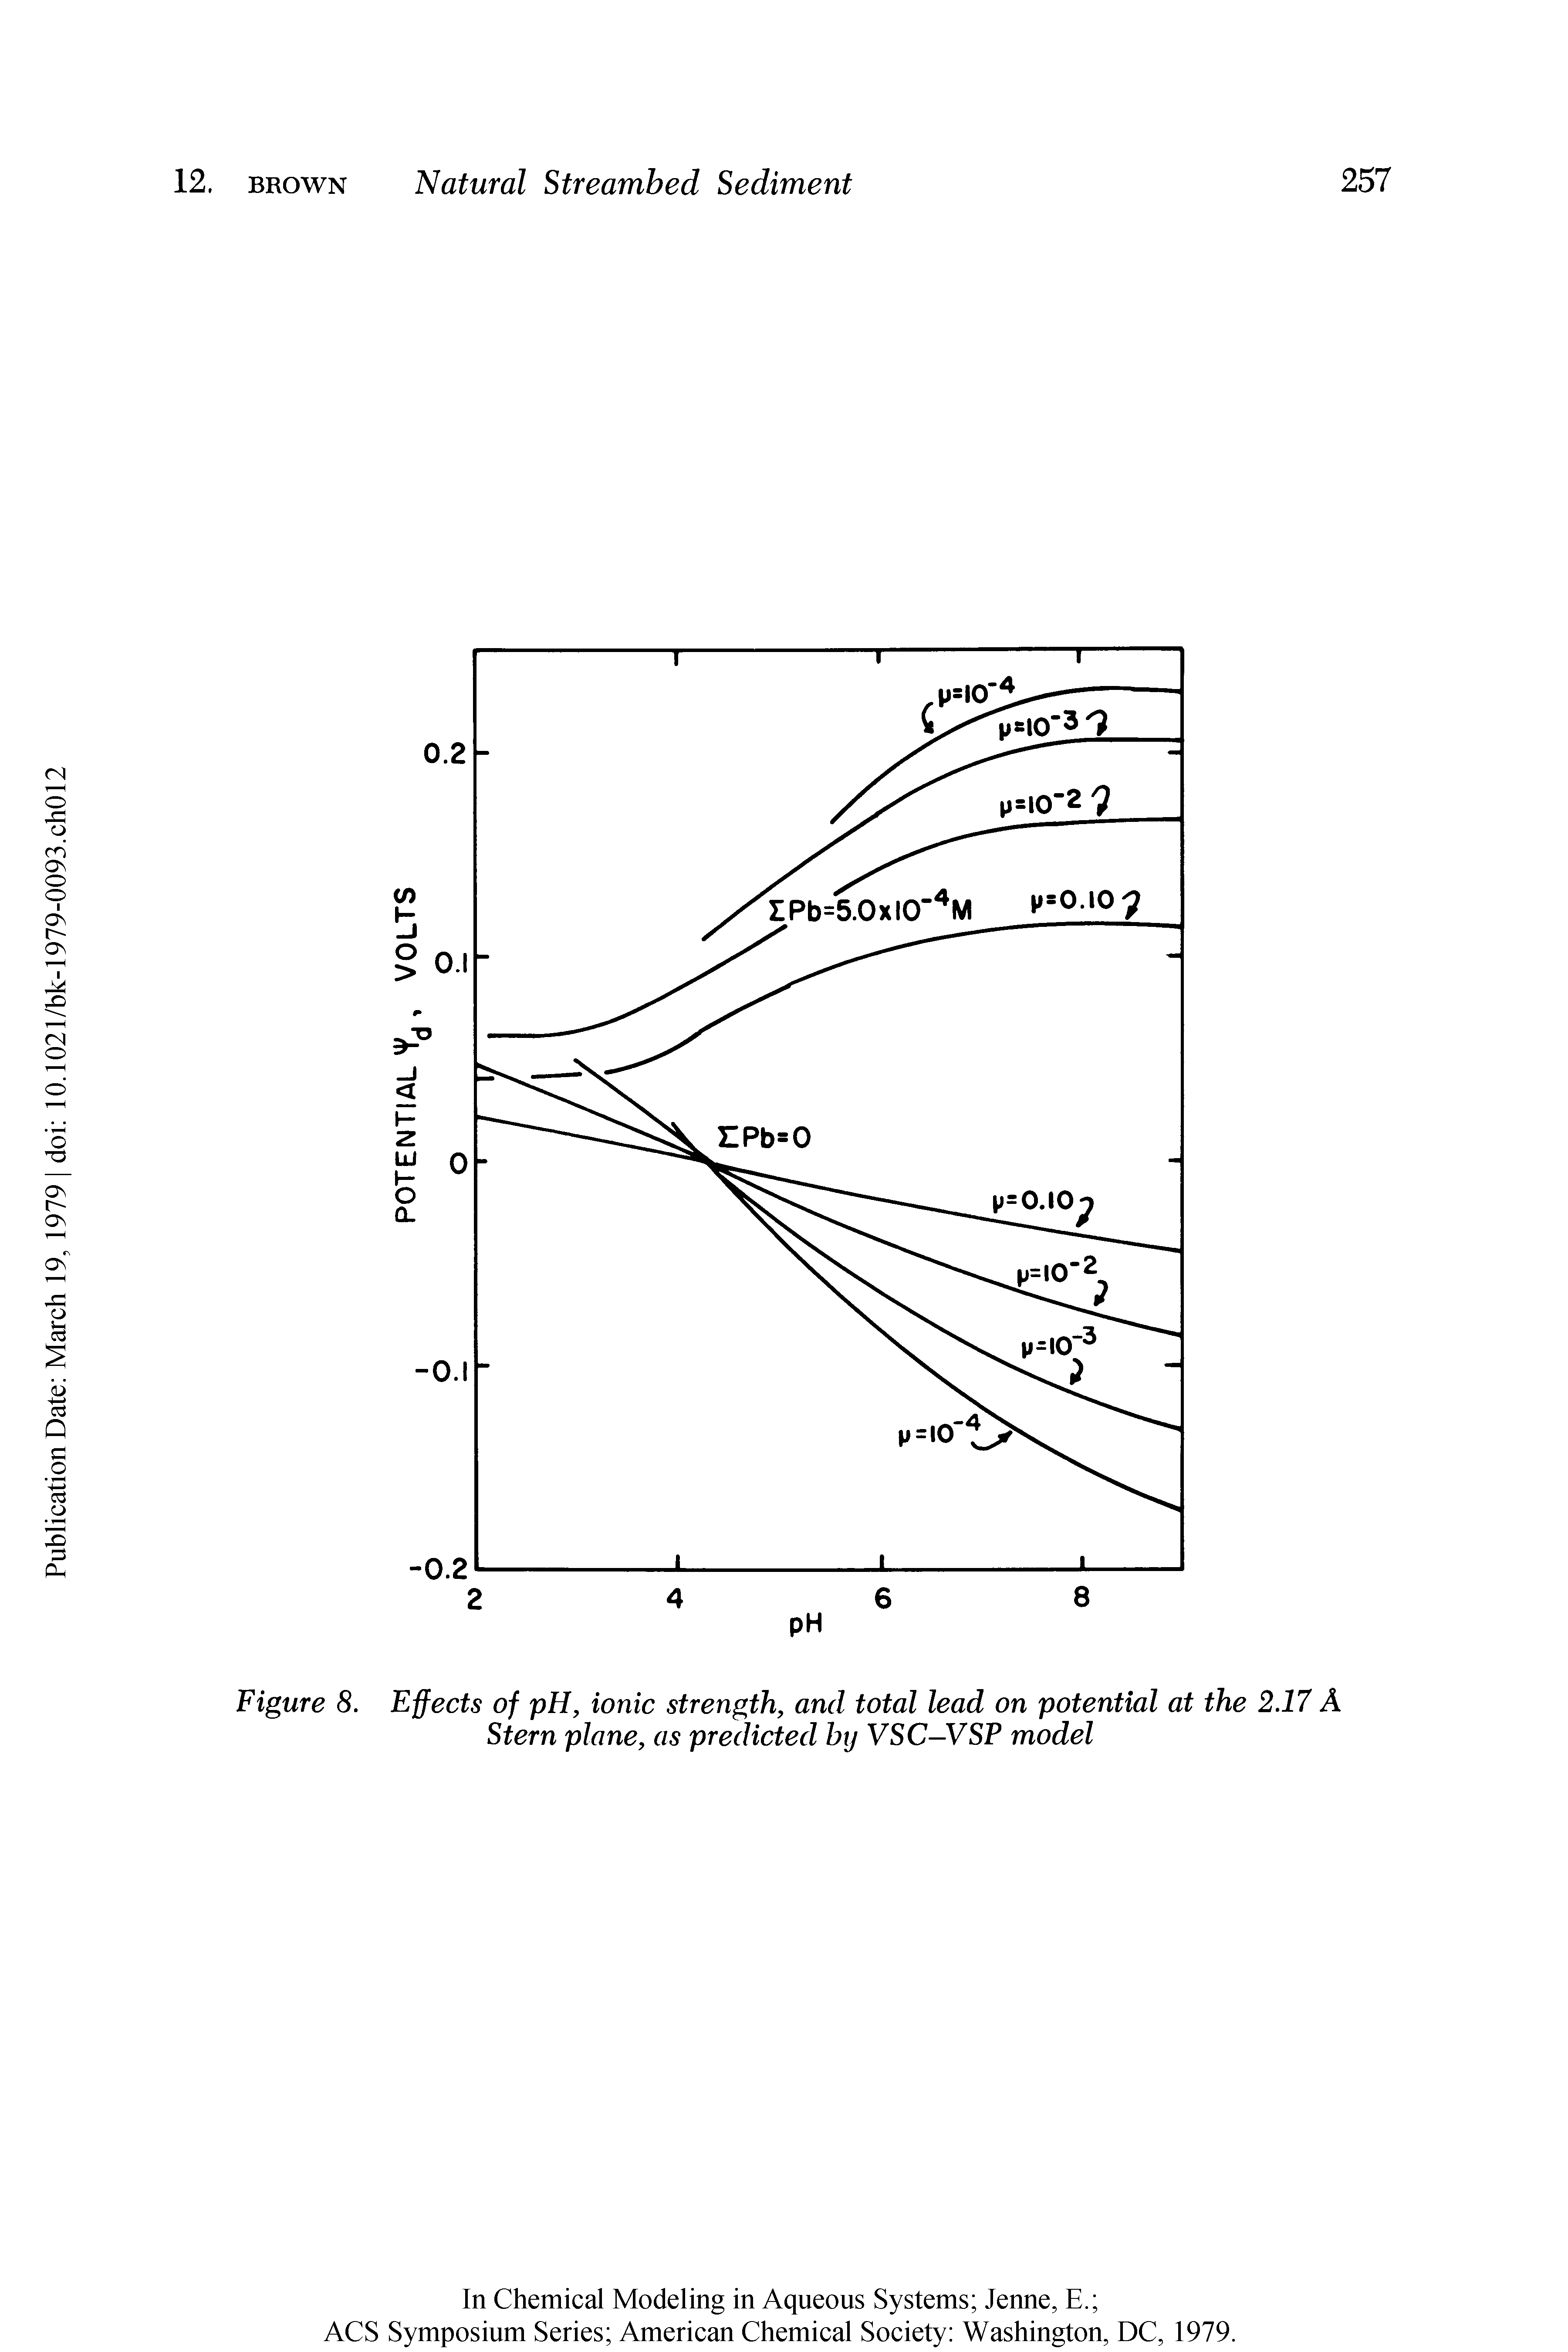 Figure 8. Effects of pH, ionic strength, and total lead on potential at the 2.17 A Stern plane, as predicted by VSC-VSP model...